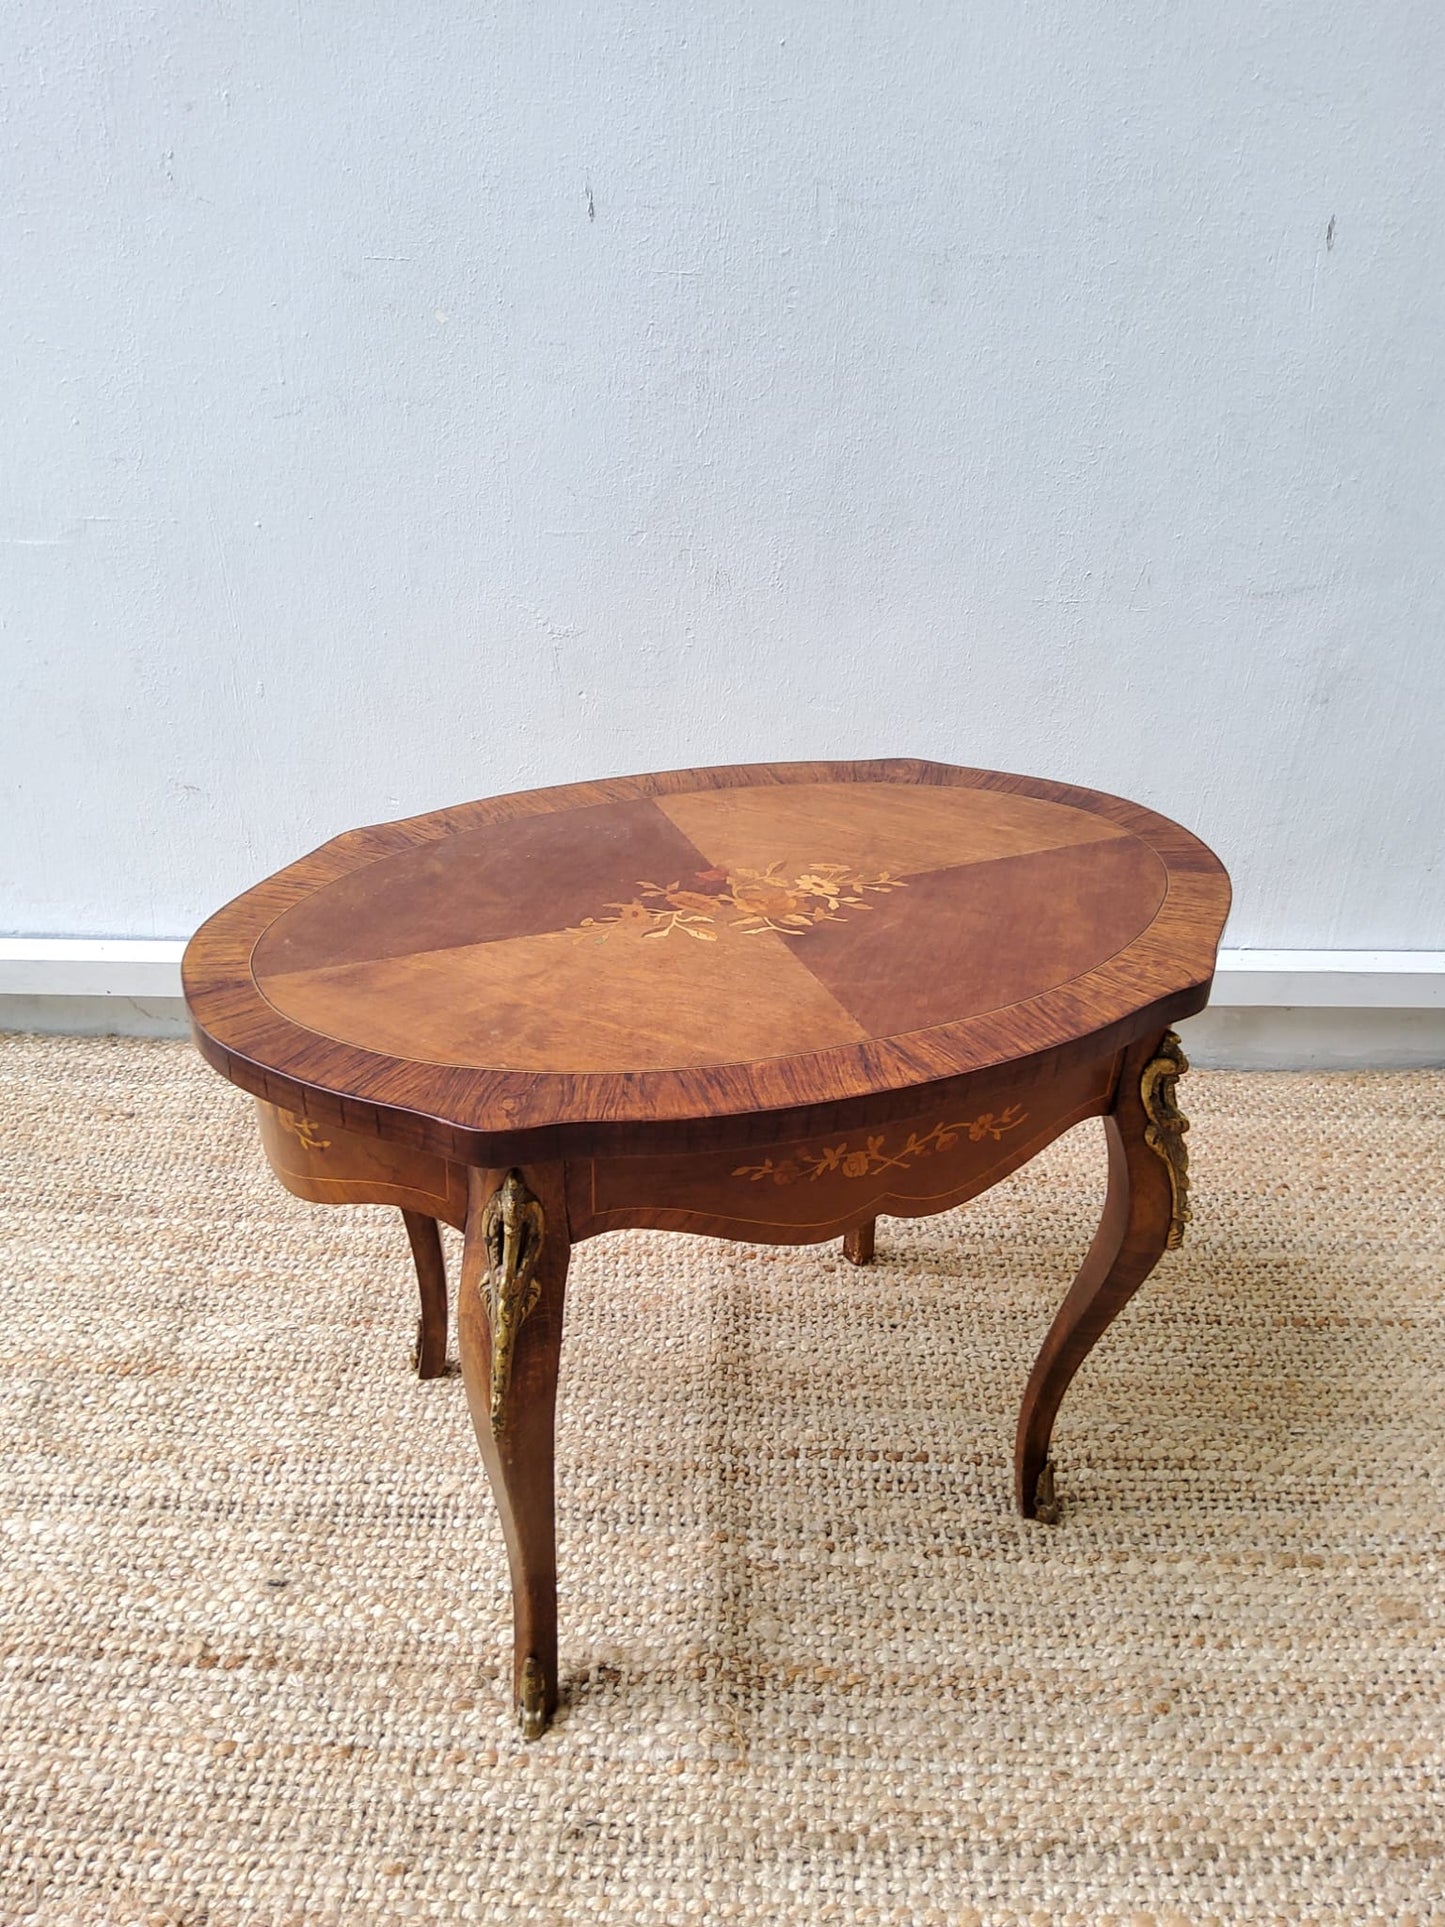 Antique French Inlaid Walnut Coffee Table With Marquetry